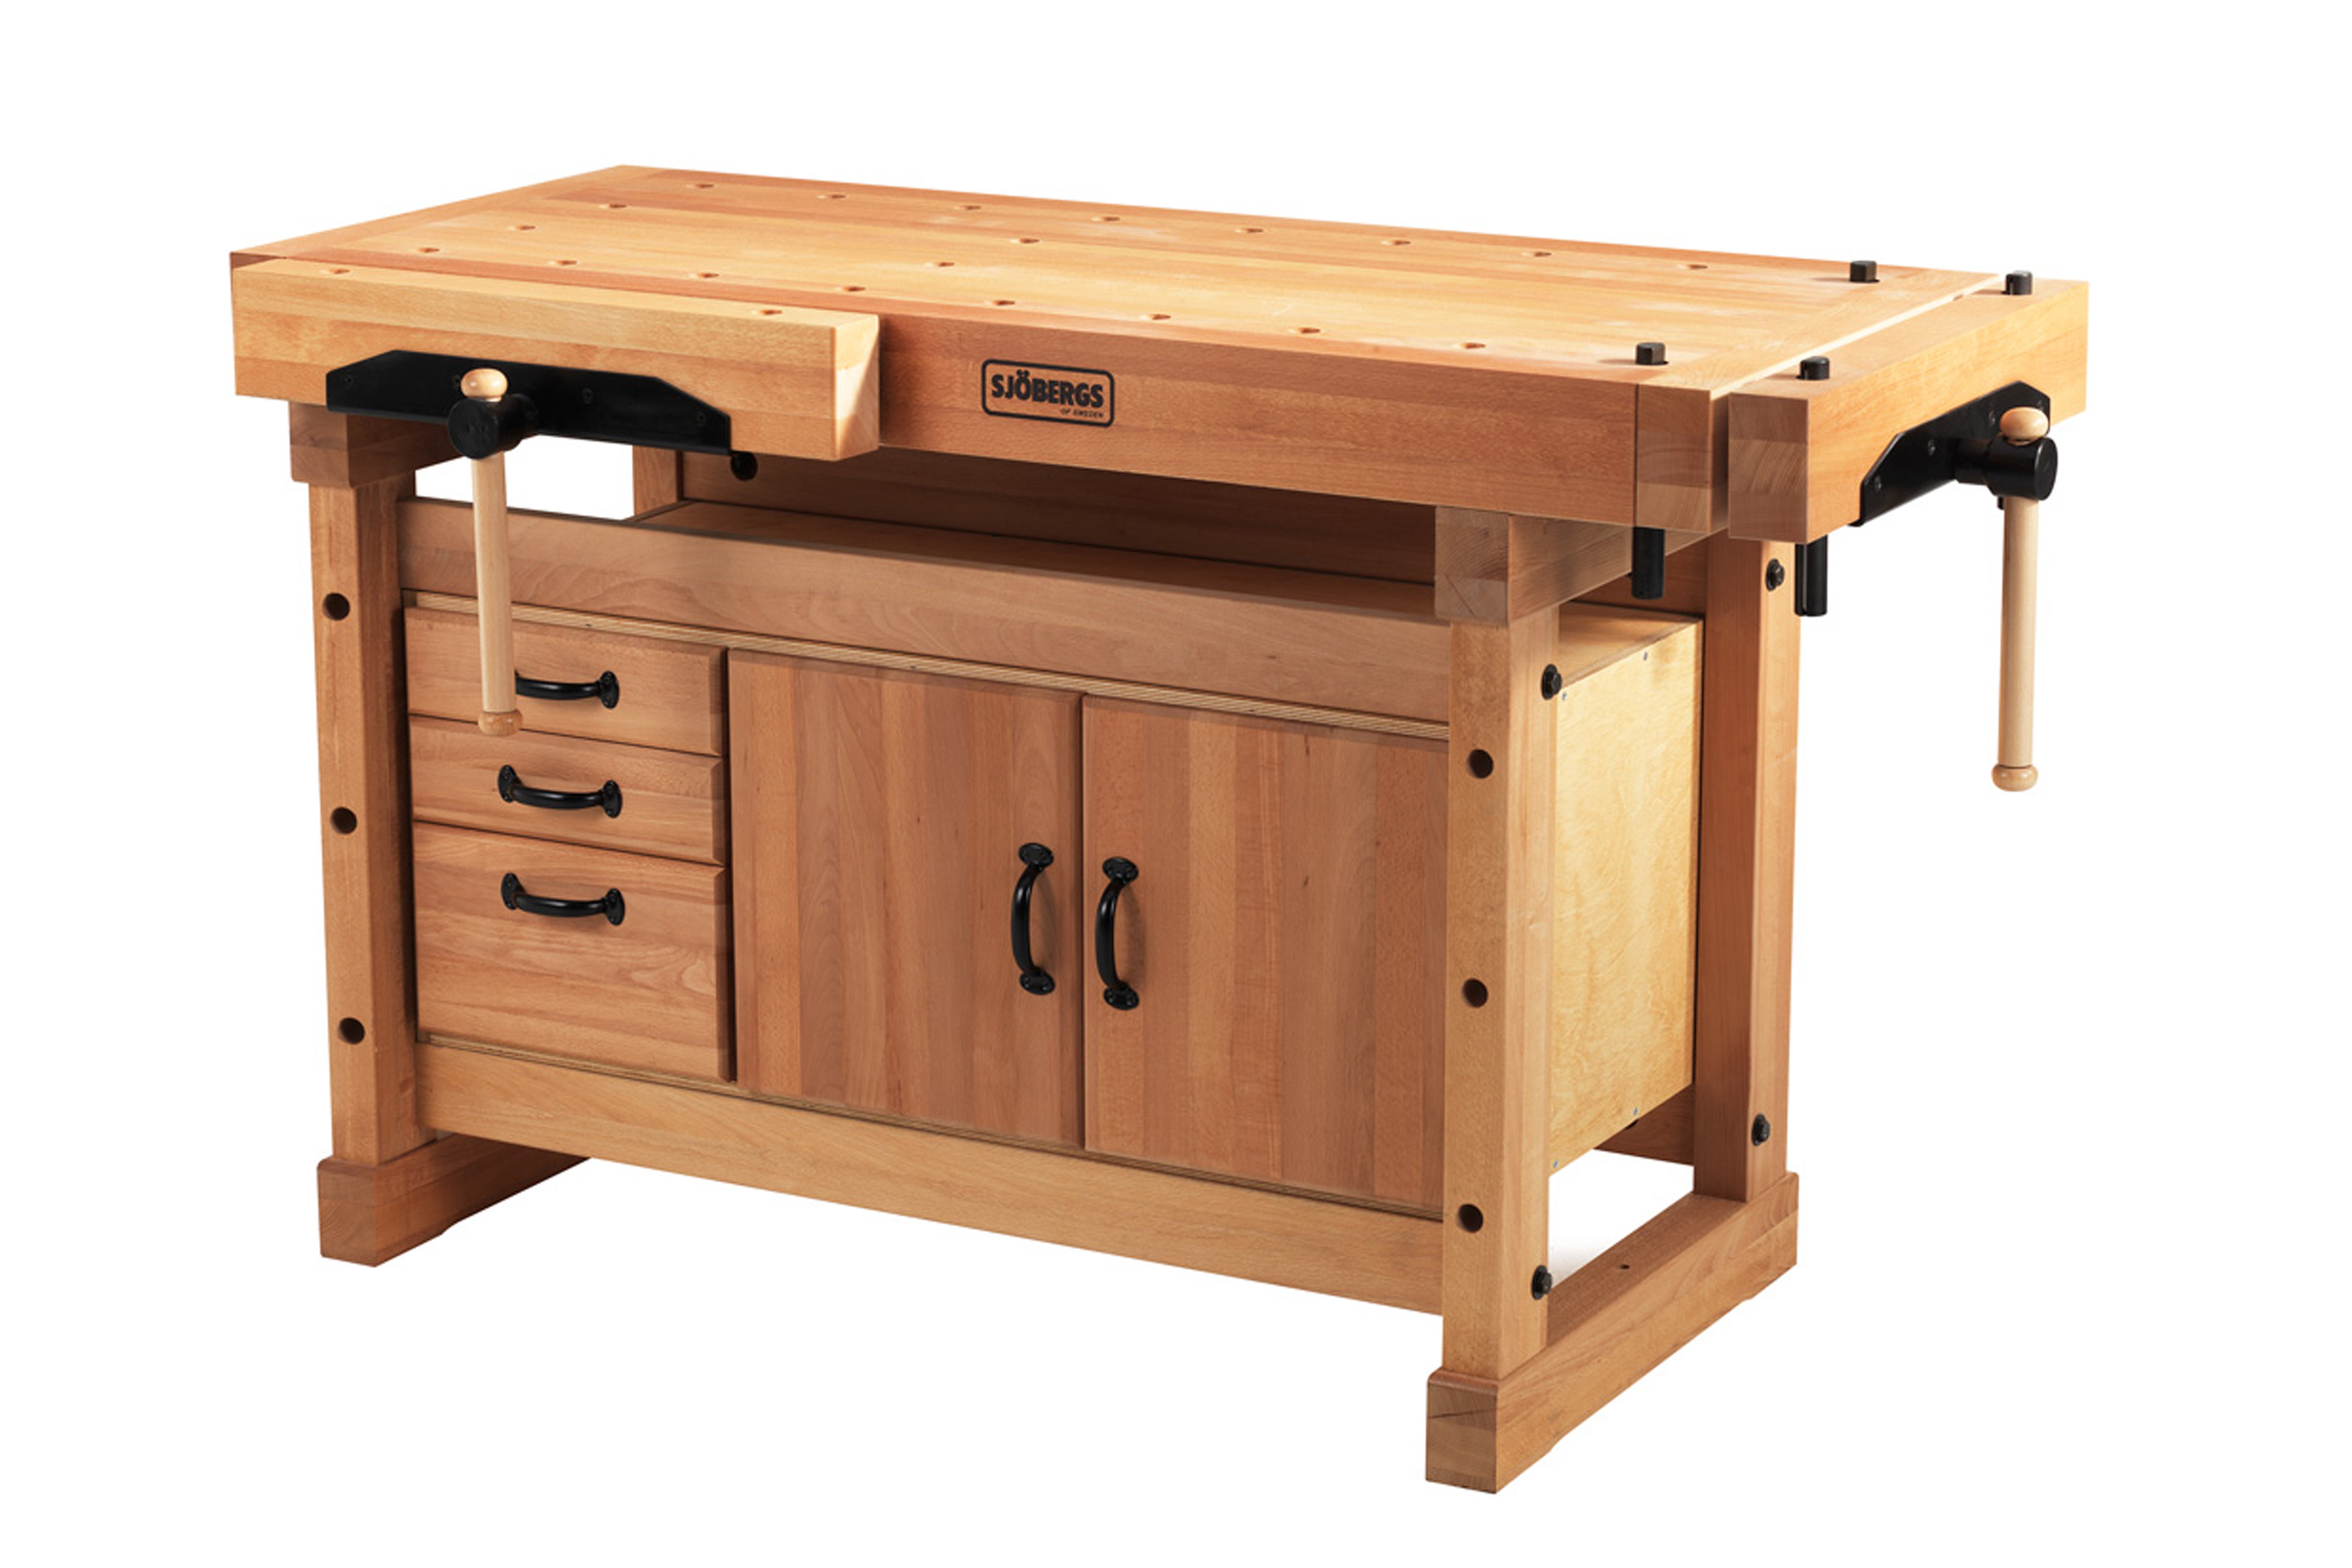 Small professional workbench with base cabinet